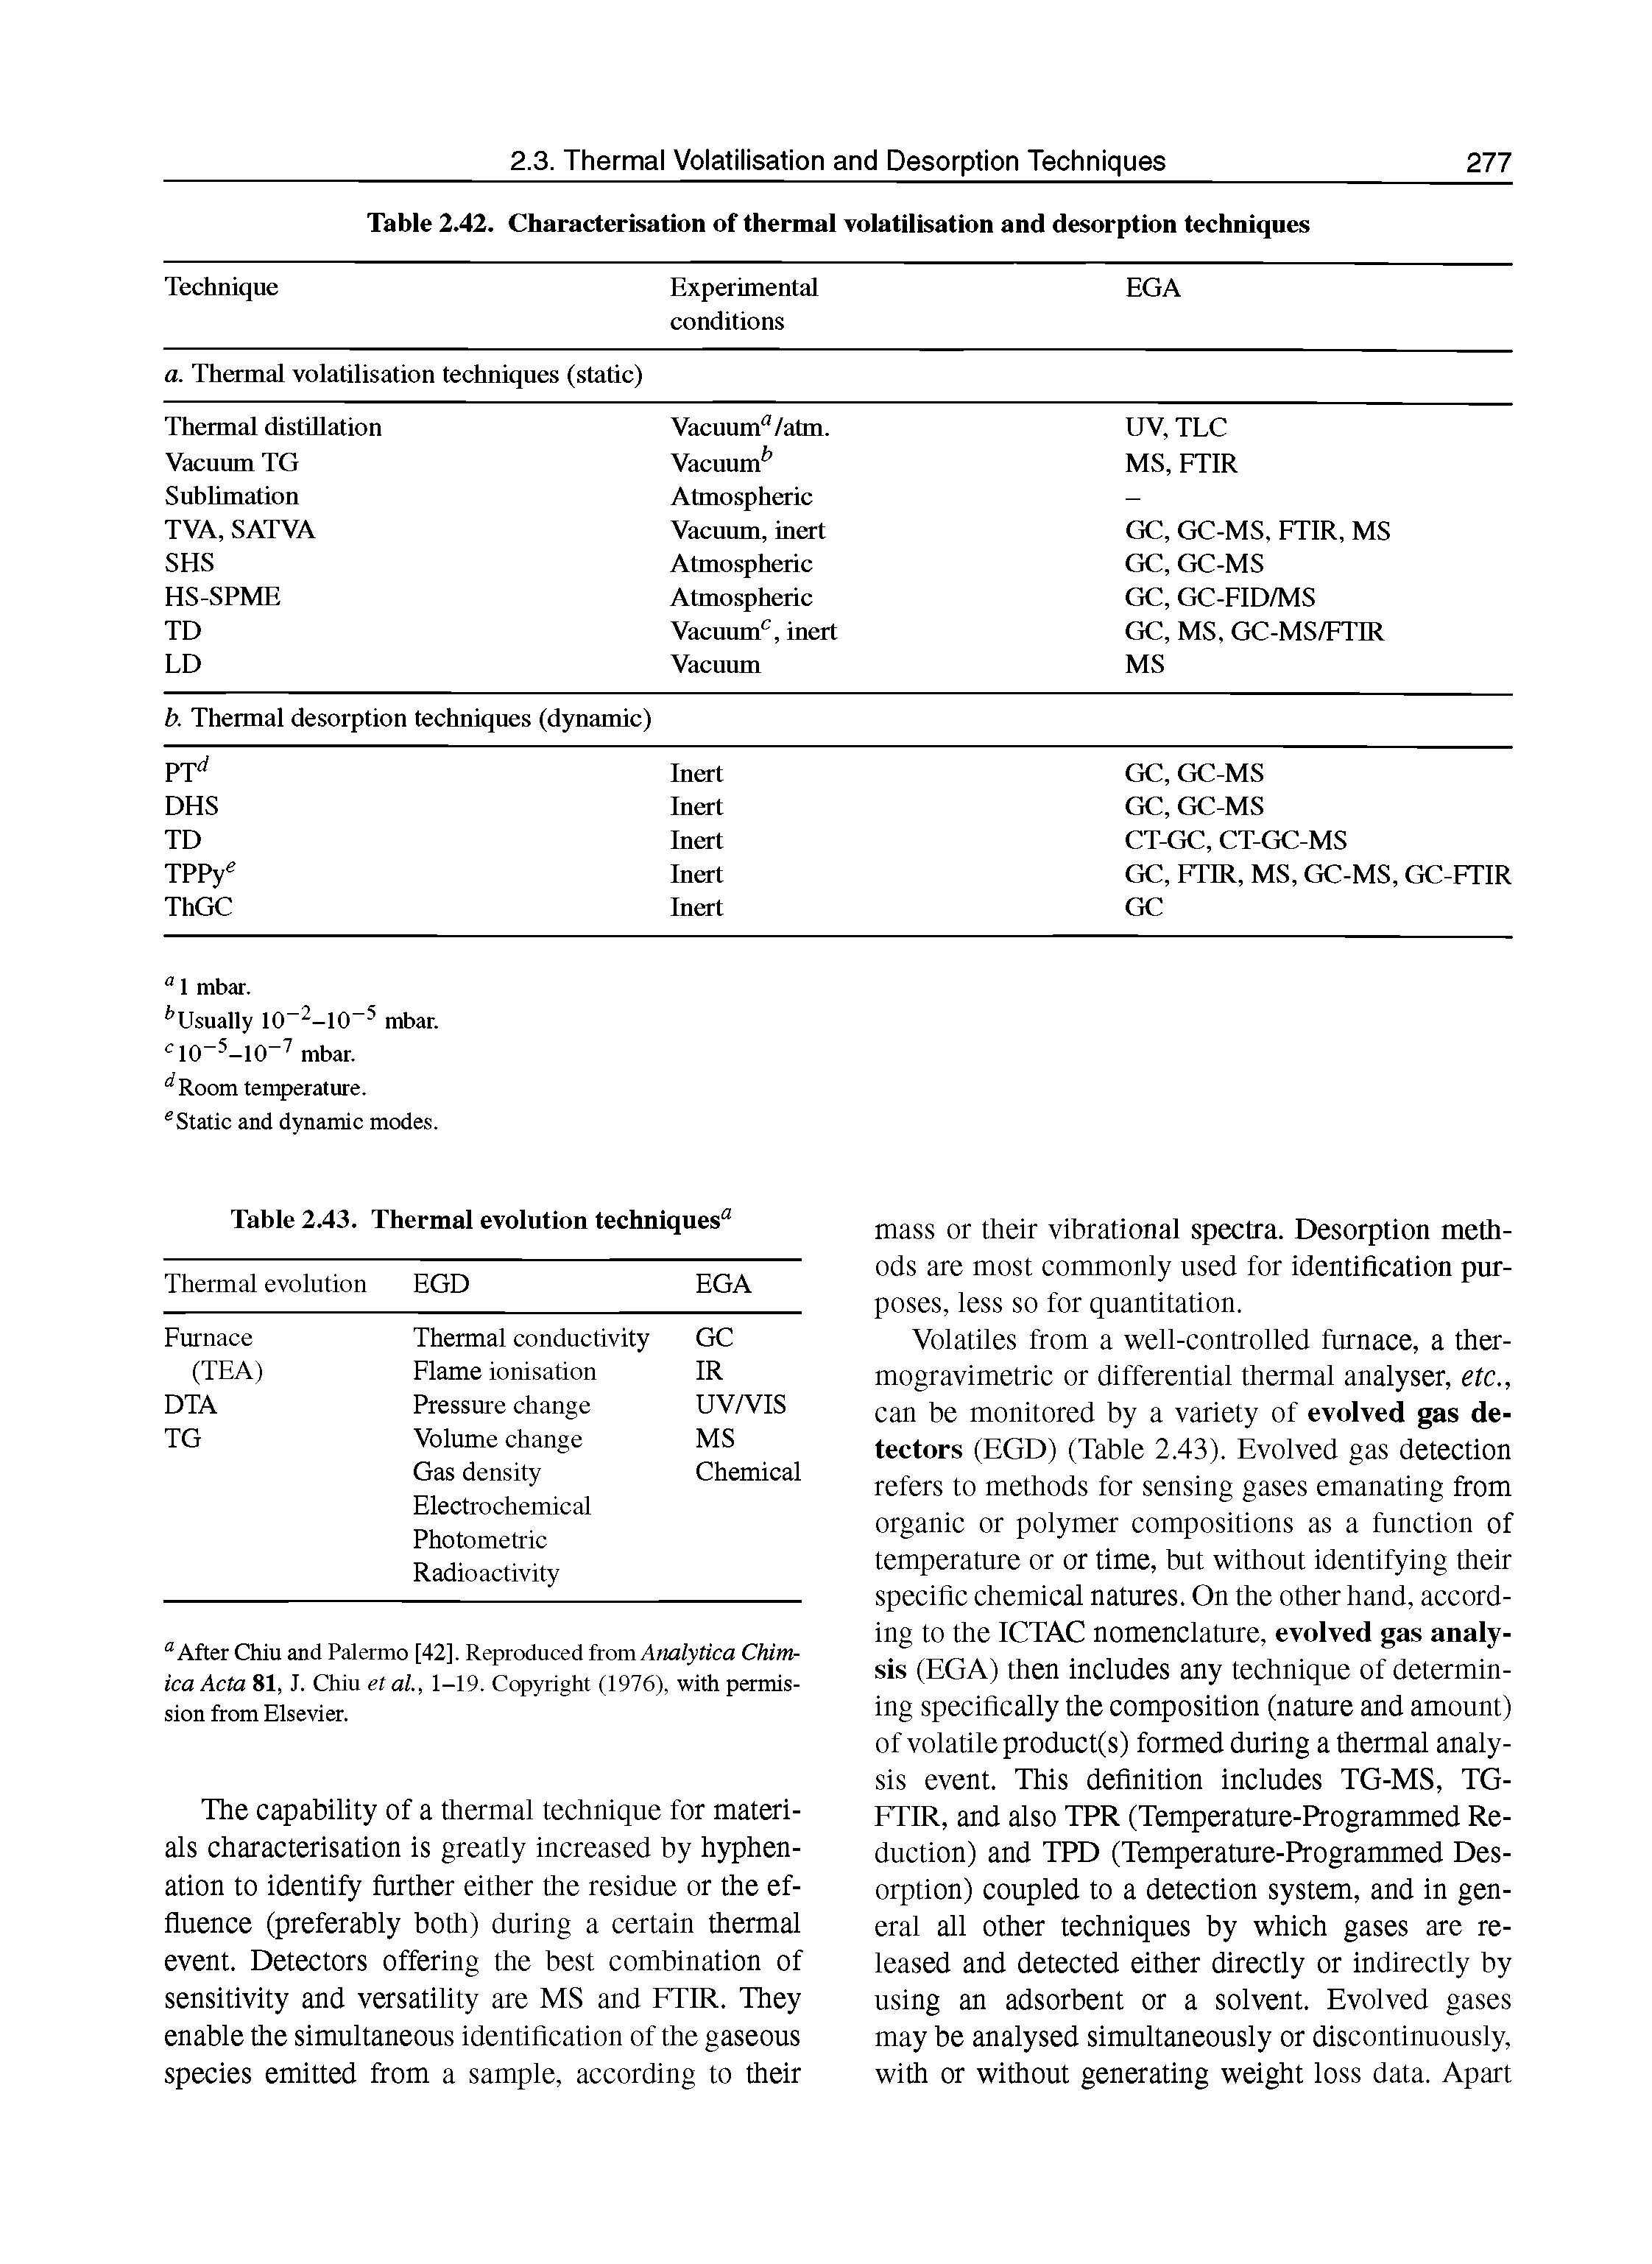 Table 2.42. Characterisation of thermal volatilisation and desorption techniques ...